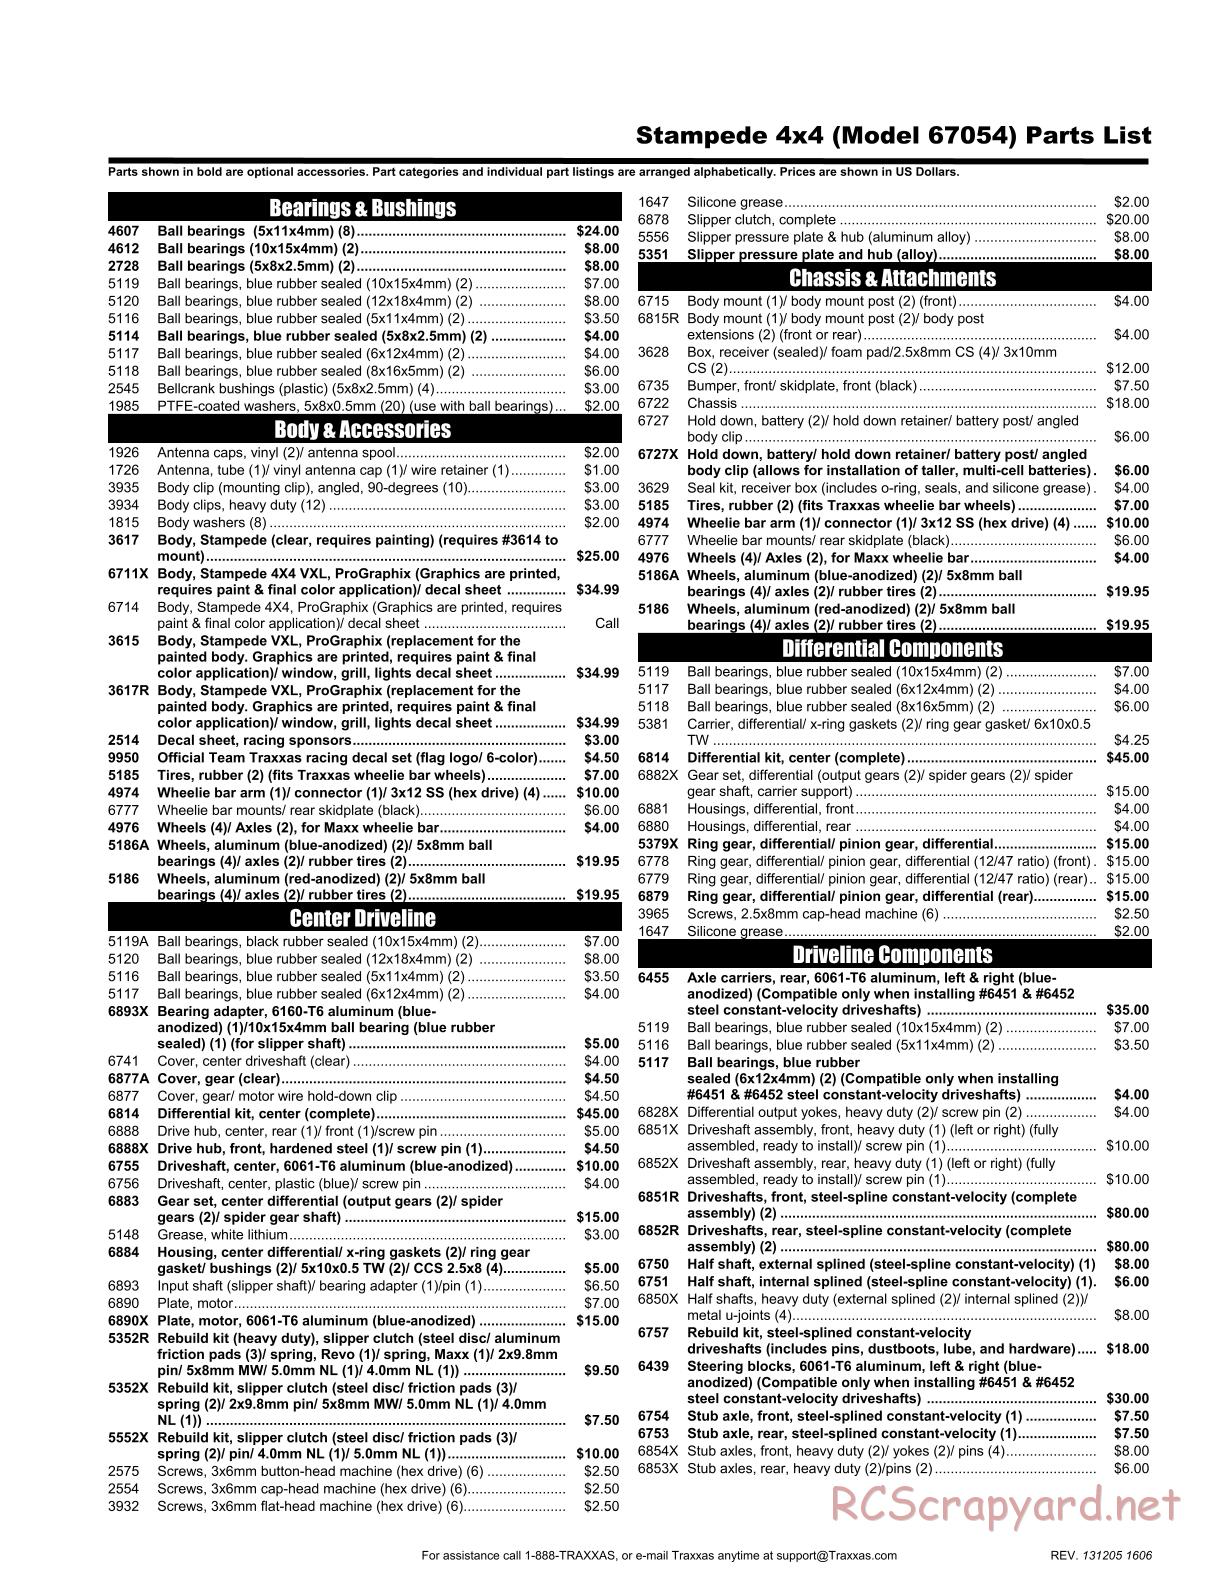 Traxxas - Stampede 4x4 (2013) - Parts List - Page 1